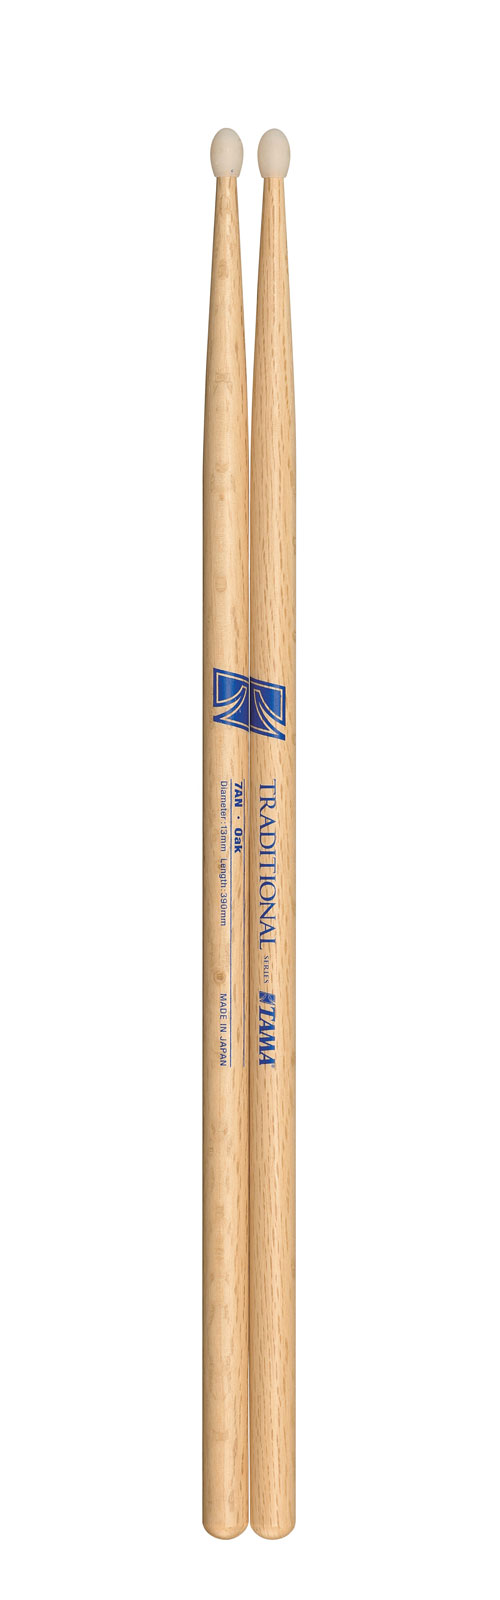 TAMA 7AN - TRADITIONAL SERIES - DRUMSTICK JAPANESE OAK - 13MM - SMALL TIP NYLON 